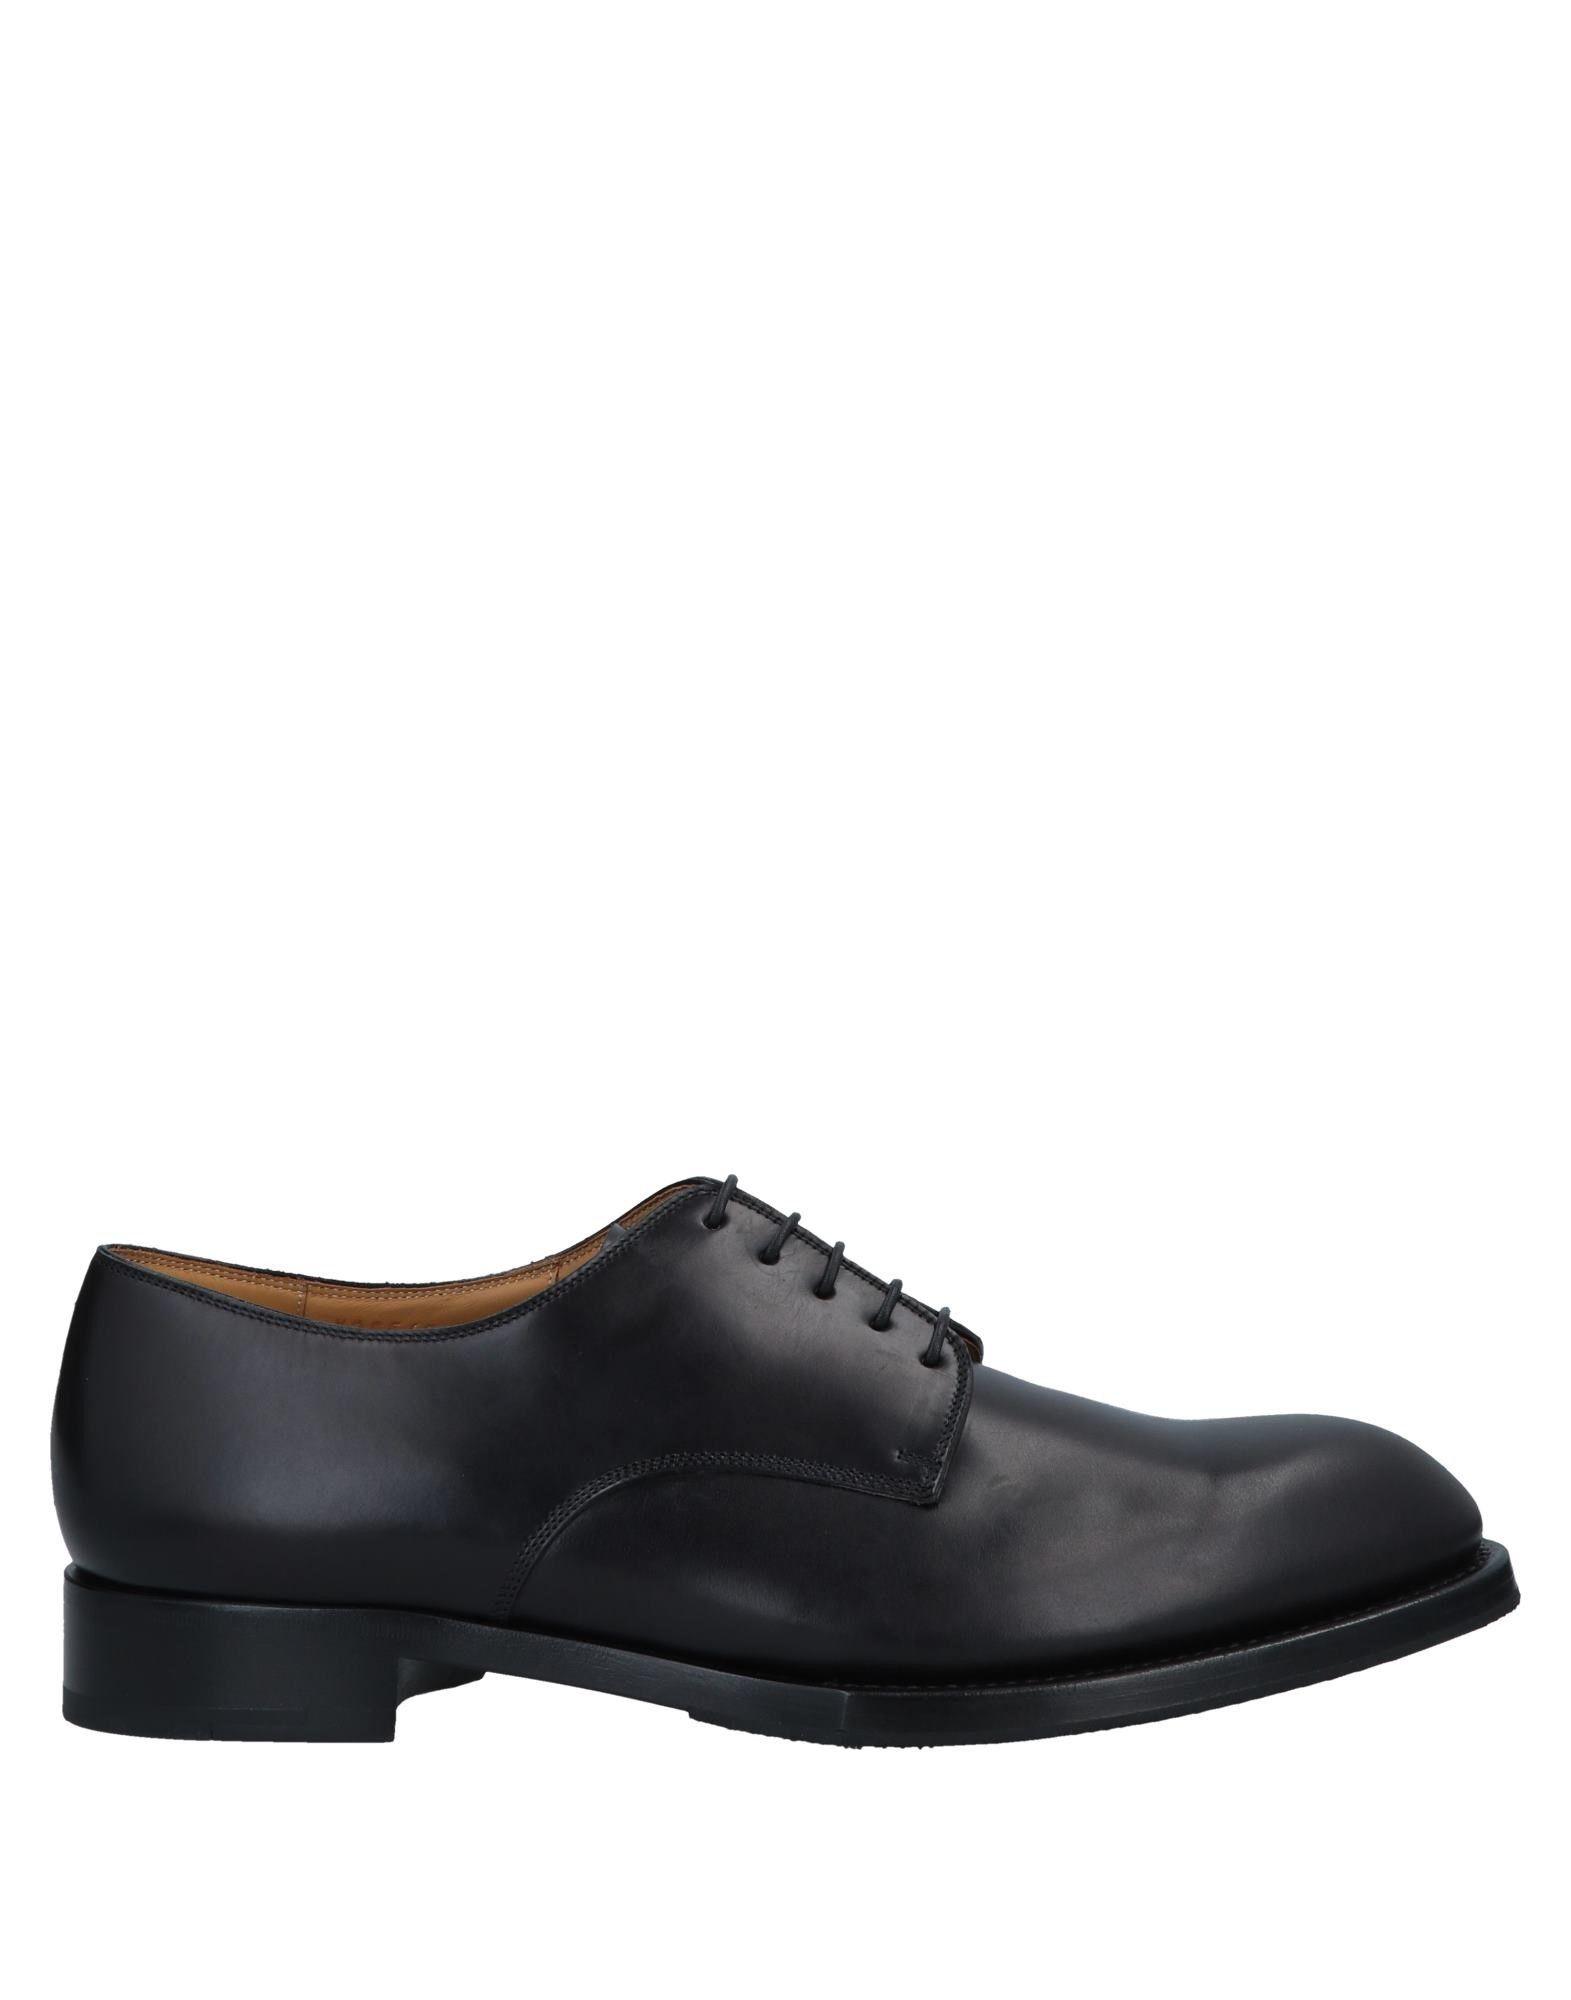 Giorgio Armani Leather Lace-up Shoe in Black for Men - Lyst